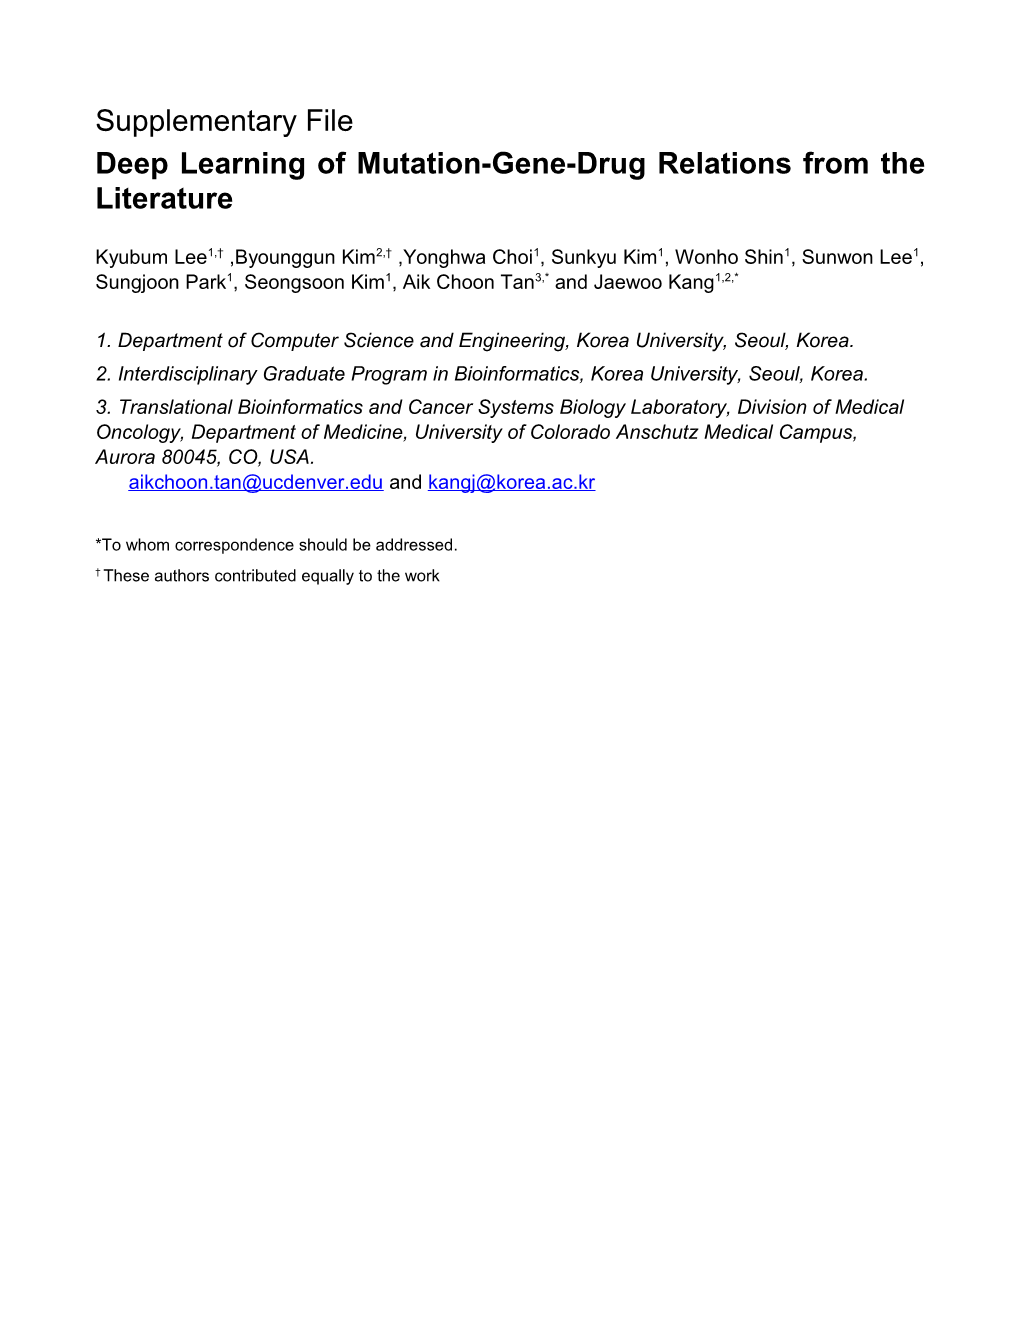 Deep Learning of Mutation-Gene-Drug Relations from the Literature